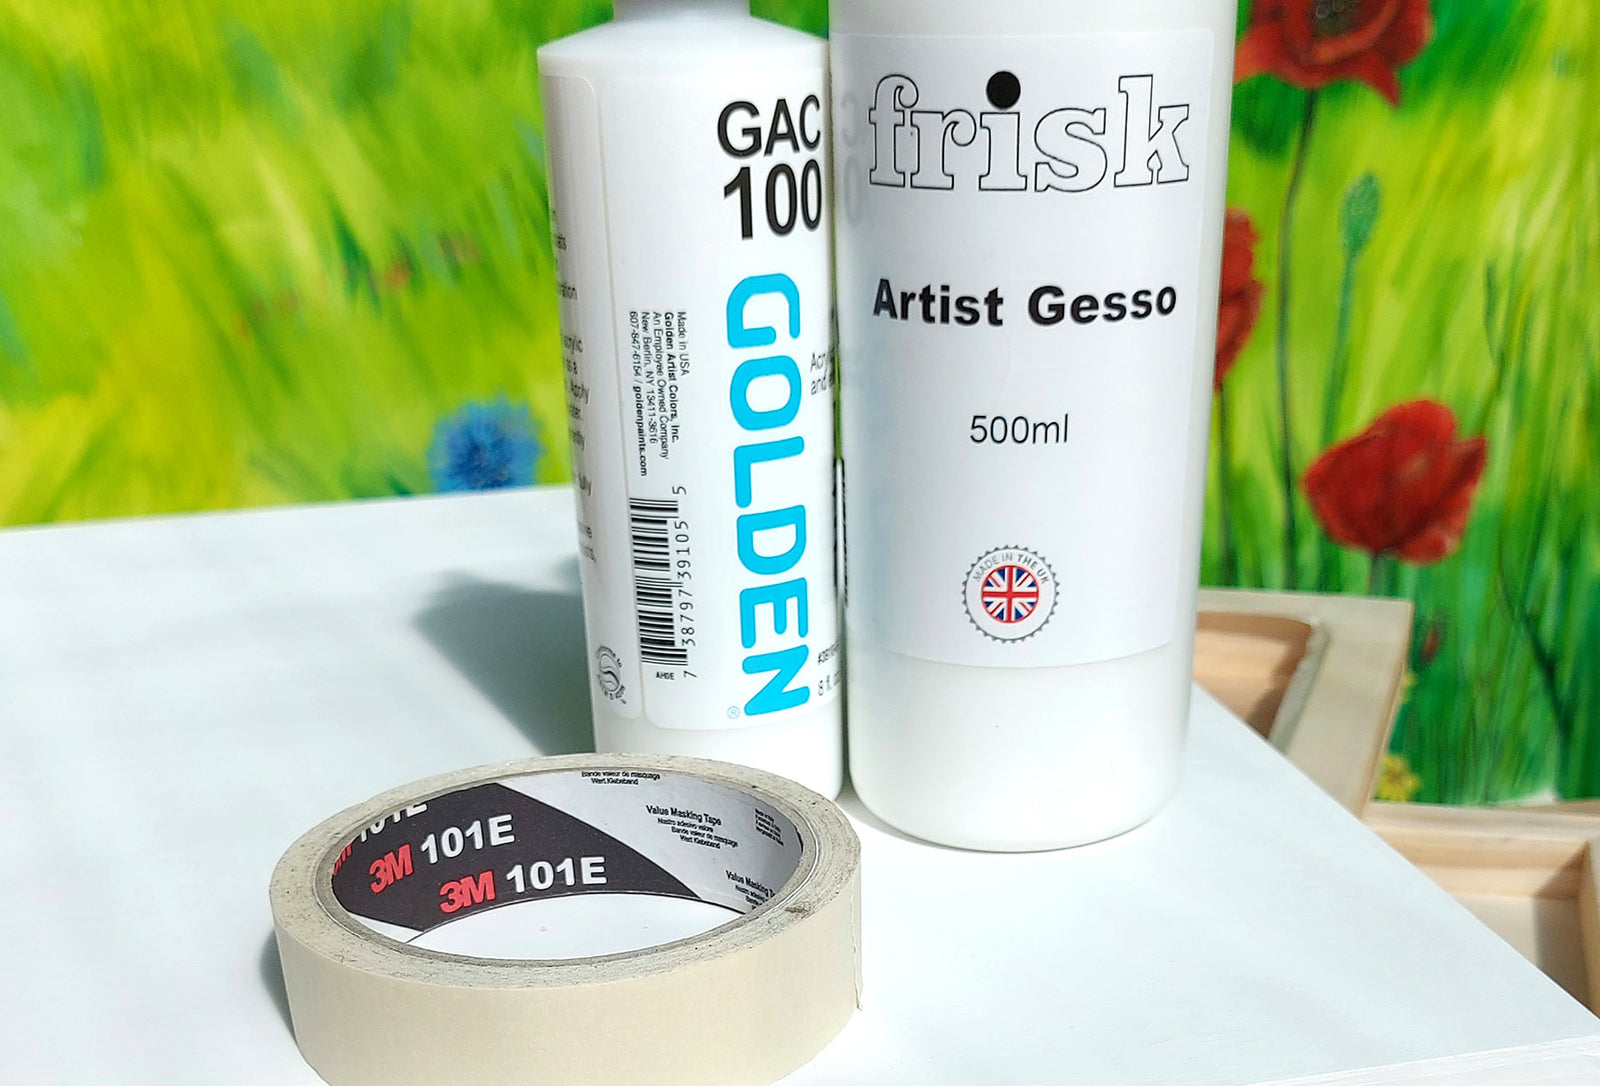 DALER ROWNEY Acrylic White Gesso White Gesso for Canvas, Oil Painting,  Paint Formulations, Panels Price in India - Buy DALER ROWNEY Acrylic White  Gesso White Gesso for Canvas, Oil Painting, Paint Formulations